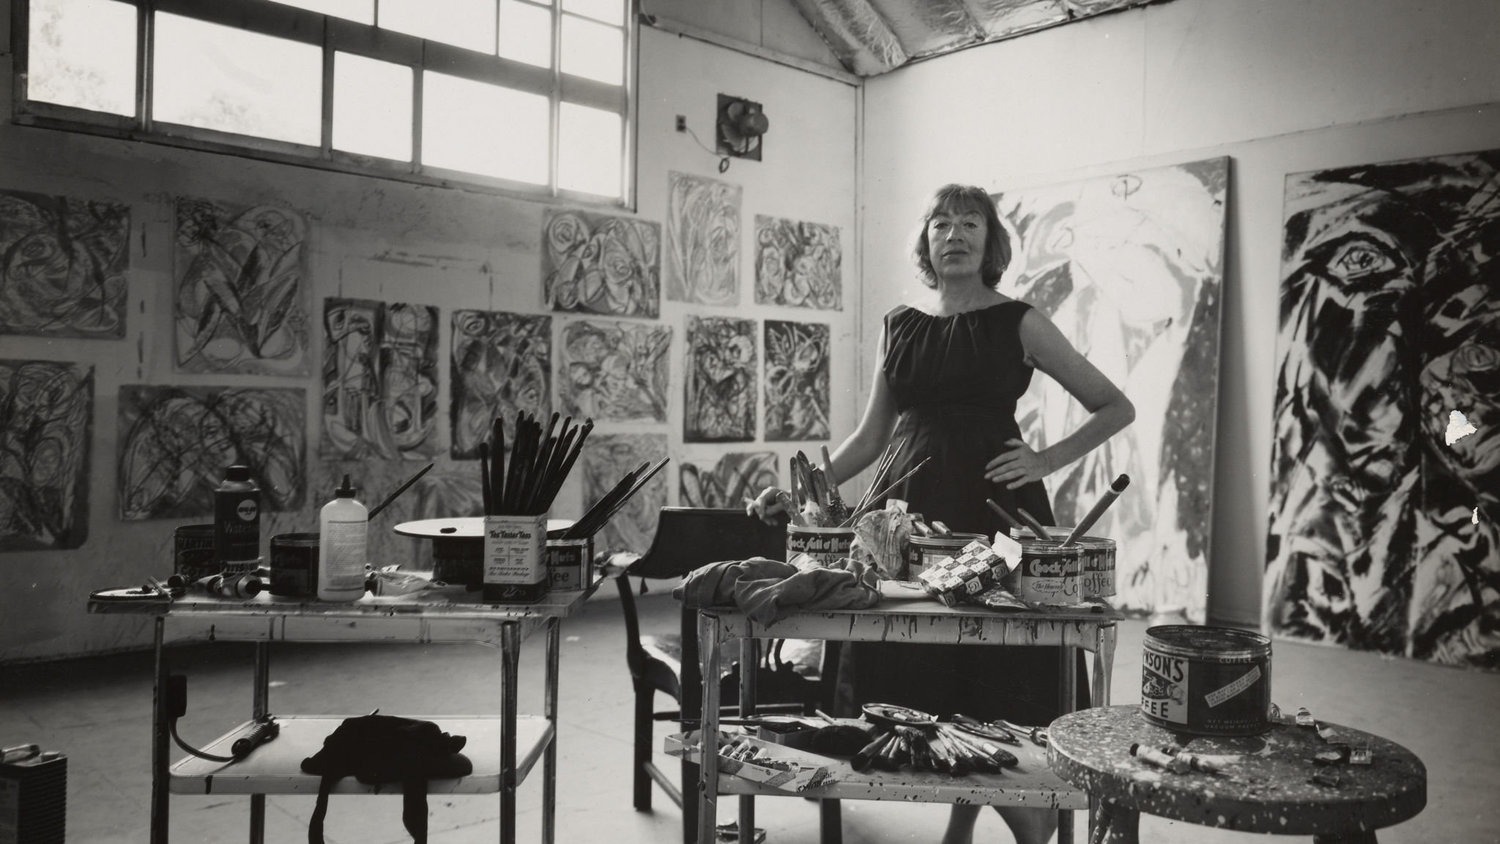 Lee Krasner in her studio in the barn, Springs, 1962, Krasner was married to artist Jackson Pollock, but she was a well-regarded artist in her own right.